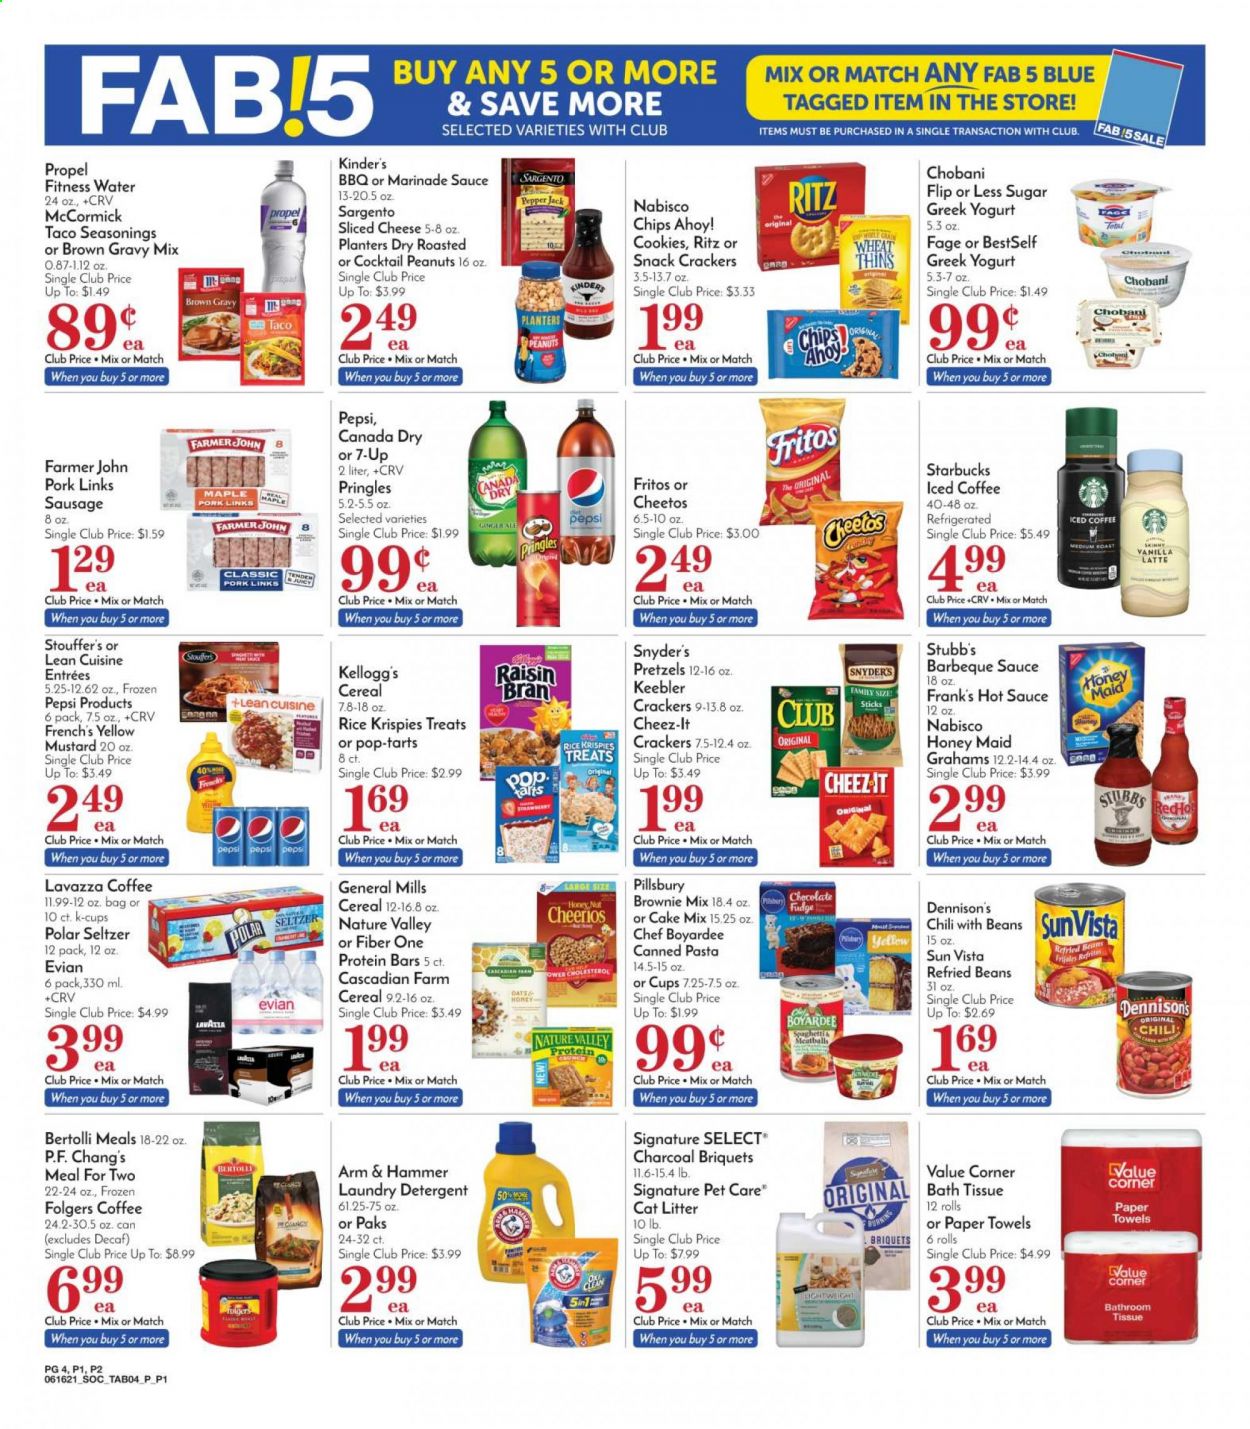 thumbnail - Pavilions Flyer - 06/16/2021 - 06/22/2021 - Sales products - pretzels, brownie mix, cake mix, pasta, sauce, Pillsbury, Lean Cuisine, Bertolli, sausage, sliced cheese, Pepper Jack cheese, cheese, Sargento, greek yoghurt, yoghurt, Chobani, Stouffer's, cookies, fudge, crackers, Kellogg's, Pop-Tarts, Chips Ahoy!, Keebler, RITZ, Fritos, Pringles, Cheetos, Thins, Cheez-It, ARM & HAMMER, refried beans, Chef Boyardee, cereals, Cheerios, protein bar, Rice Krispies, Raisin Bran, Honey Maid, Nature Valley, Fiber One, gravy mix, BBQ sauce, mustard, hot sauce, marinade, peanuts, Planters, Canada Dry, ginger ale, Pepsi, 7UP, seltzer water, Evian, iced coffee, Starbucks, Folgers, coffee capsules, K-Cups, Lavazza, bath tissue, kitchen towels, paper towels, detergent, laundry detergent, cat litter, bag. Page 4.